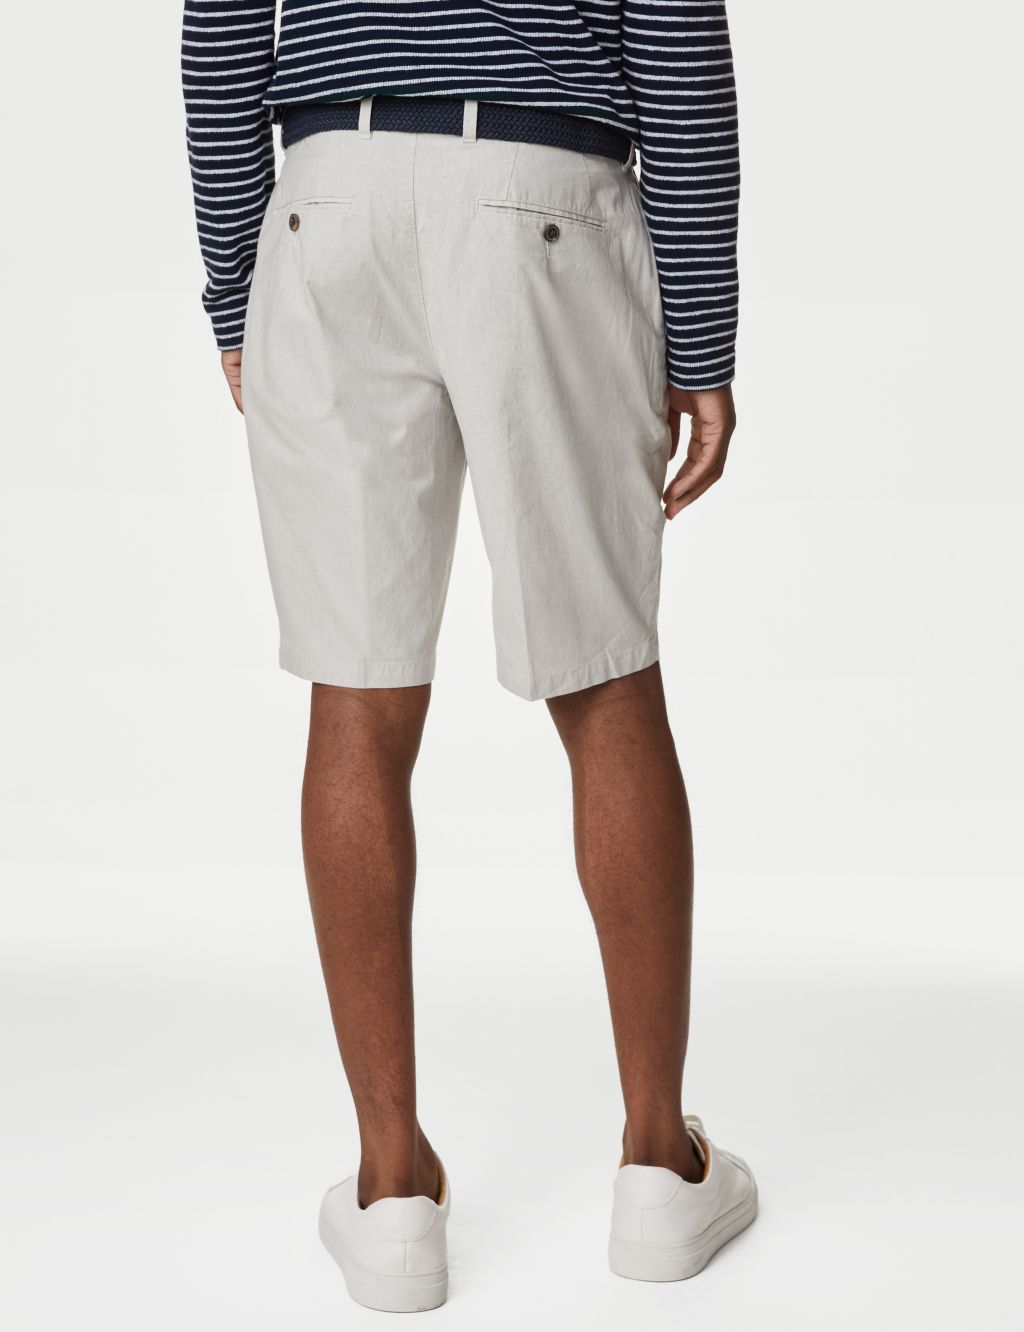 Striped Belted Stretch Chino Shorts | M&S Collection | M&S